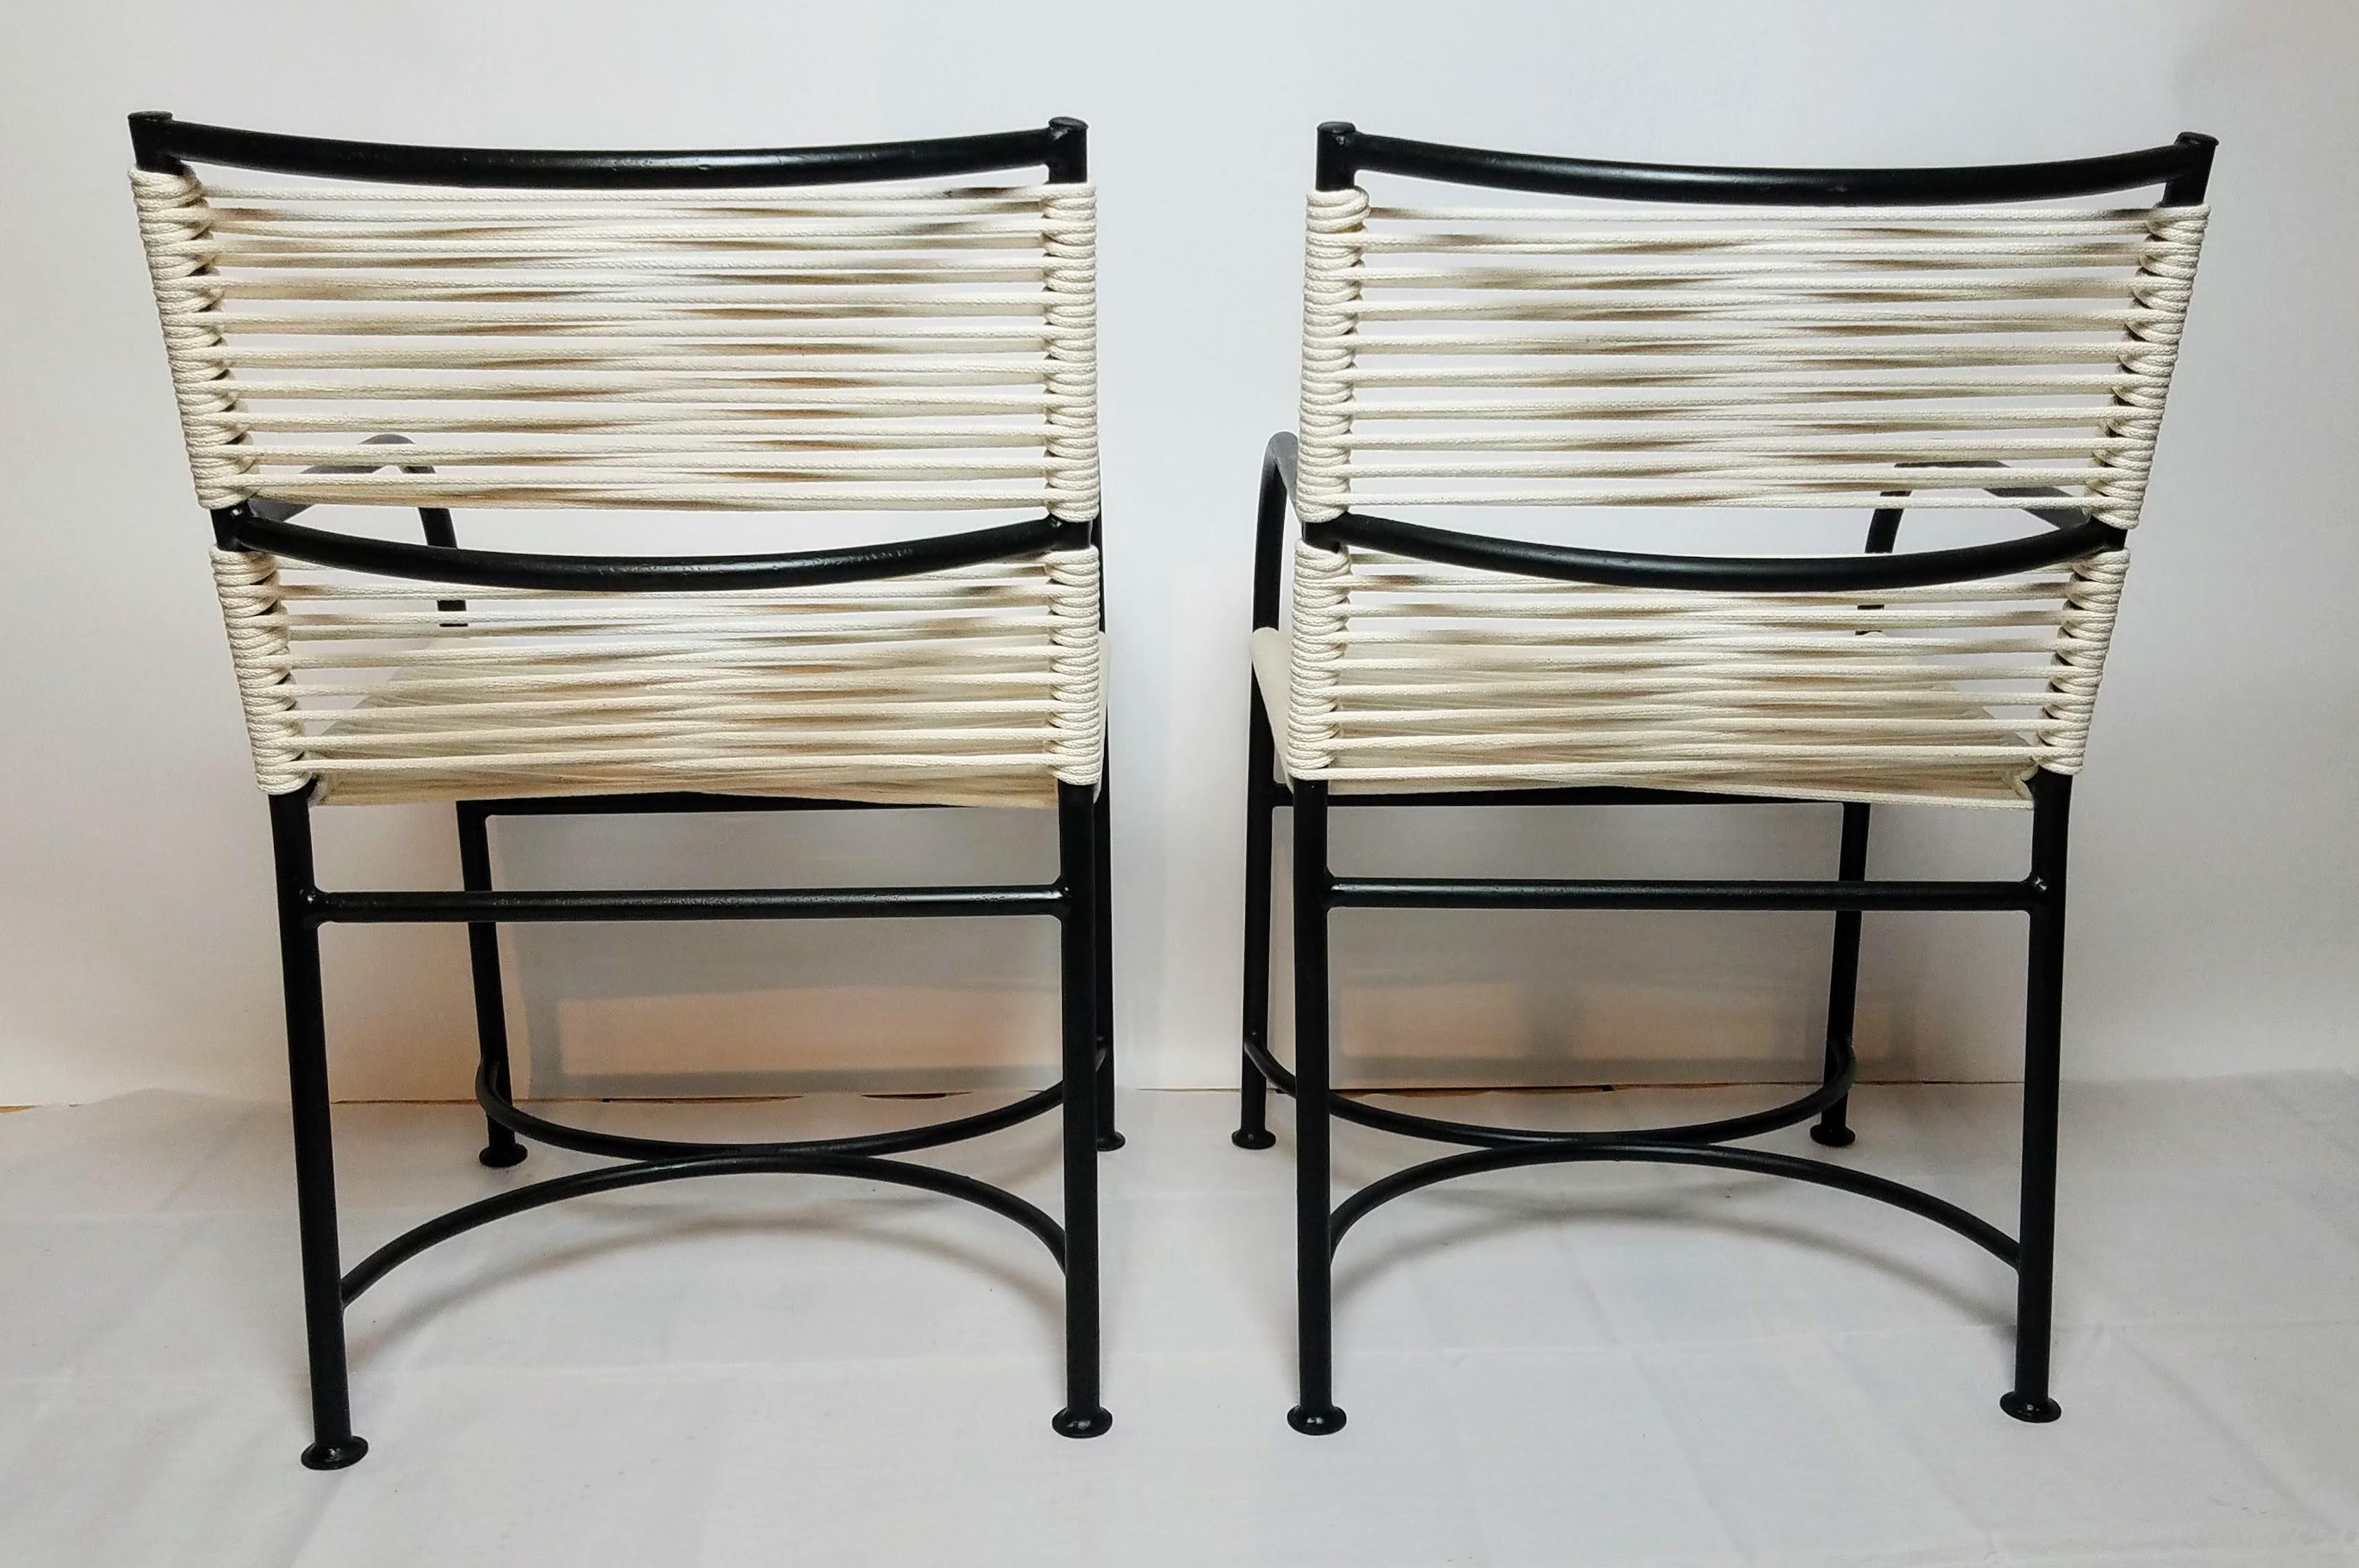 Lacquered Robert Lewis Pair Steel Pipe Armchairs Hand Built Santa Barbara CA, 1930s/40s For Sale